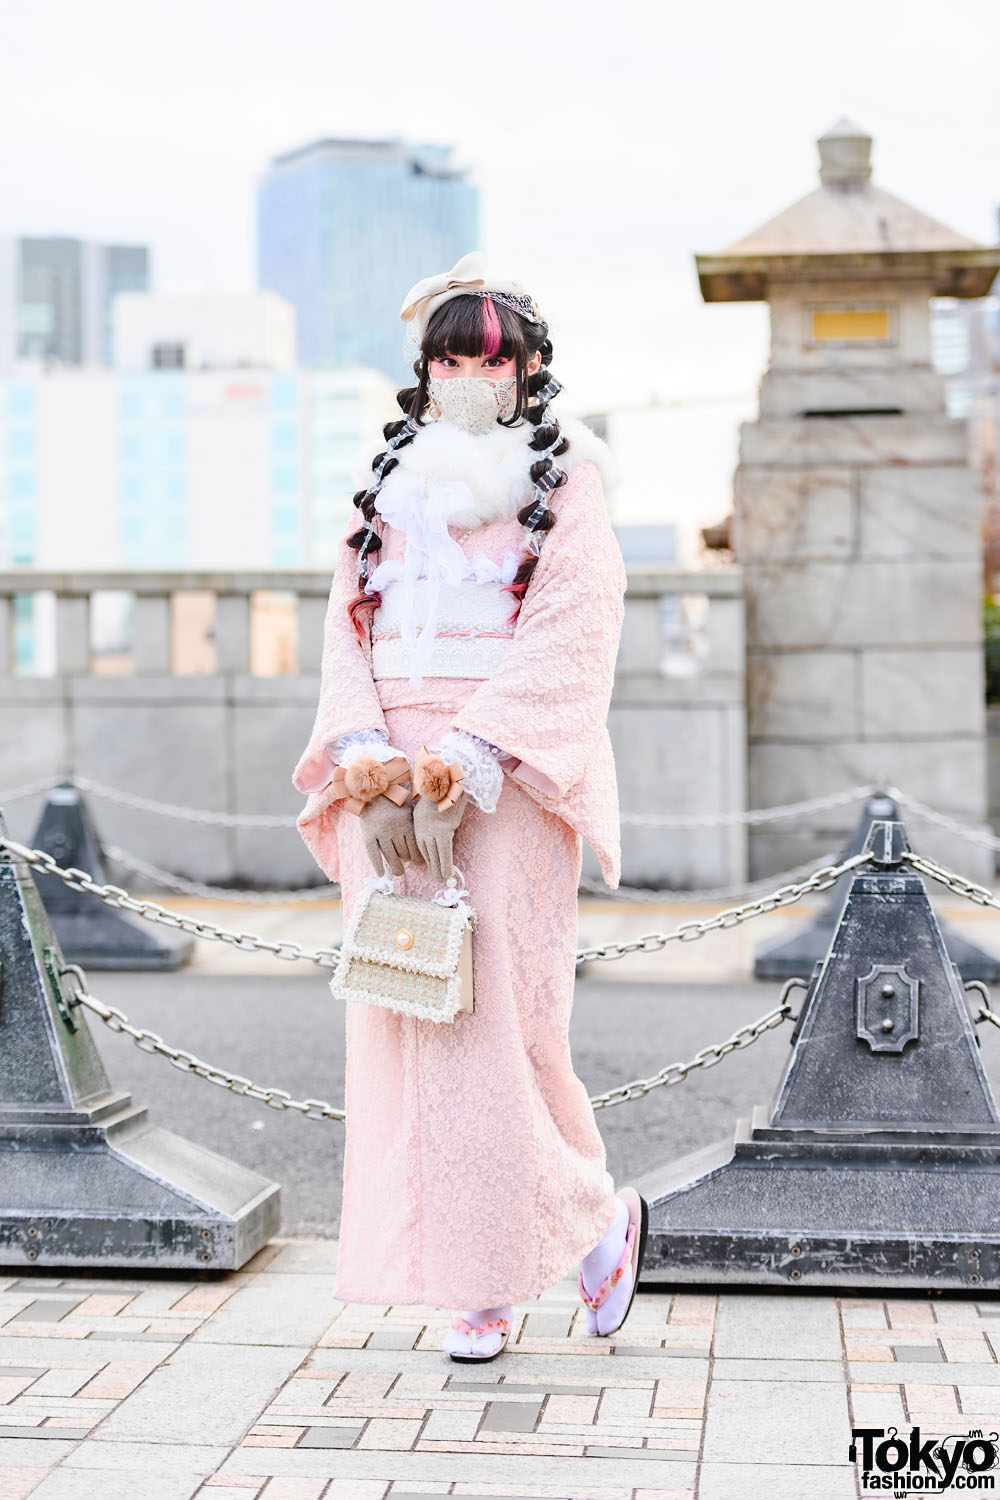 RinRin Doll Wearing a Kimono & Twintails Hairstyle on The Street in Harajuku